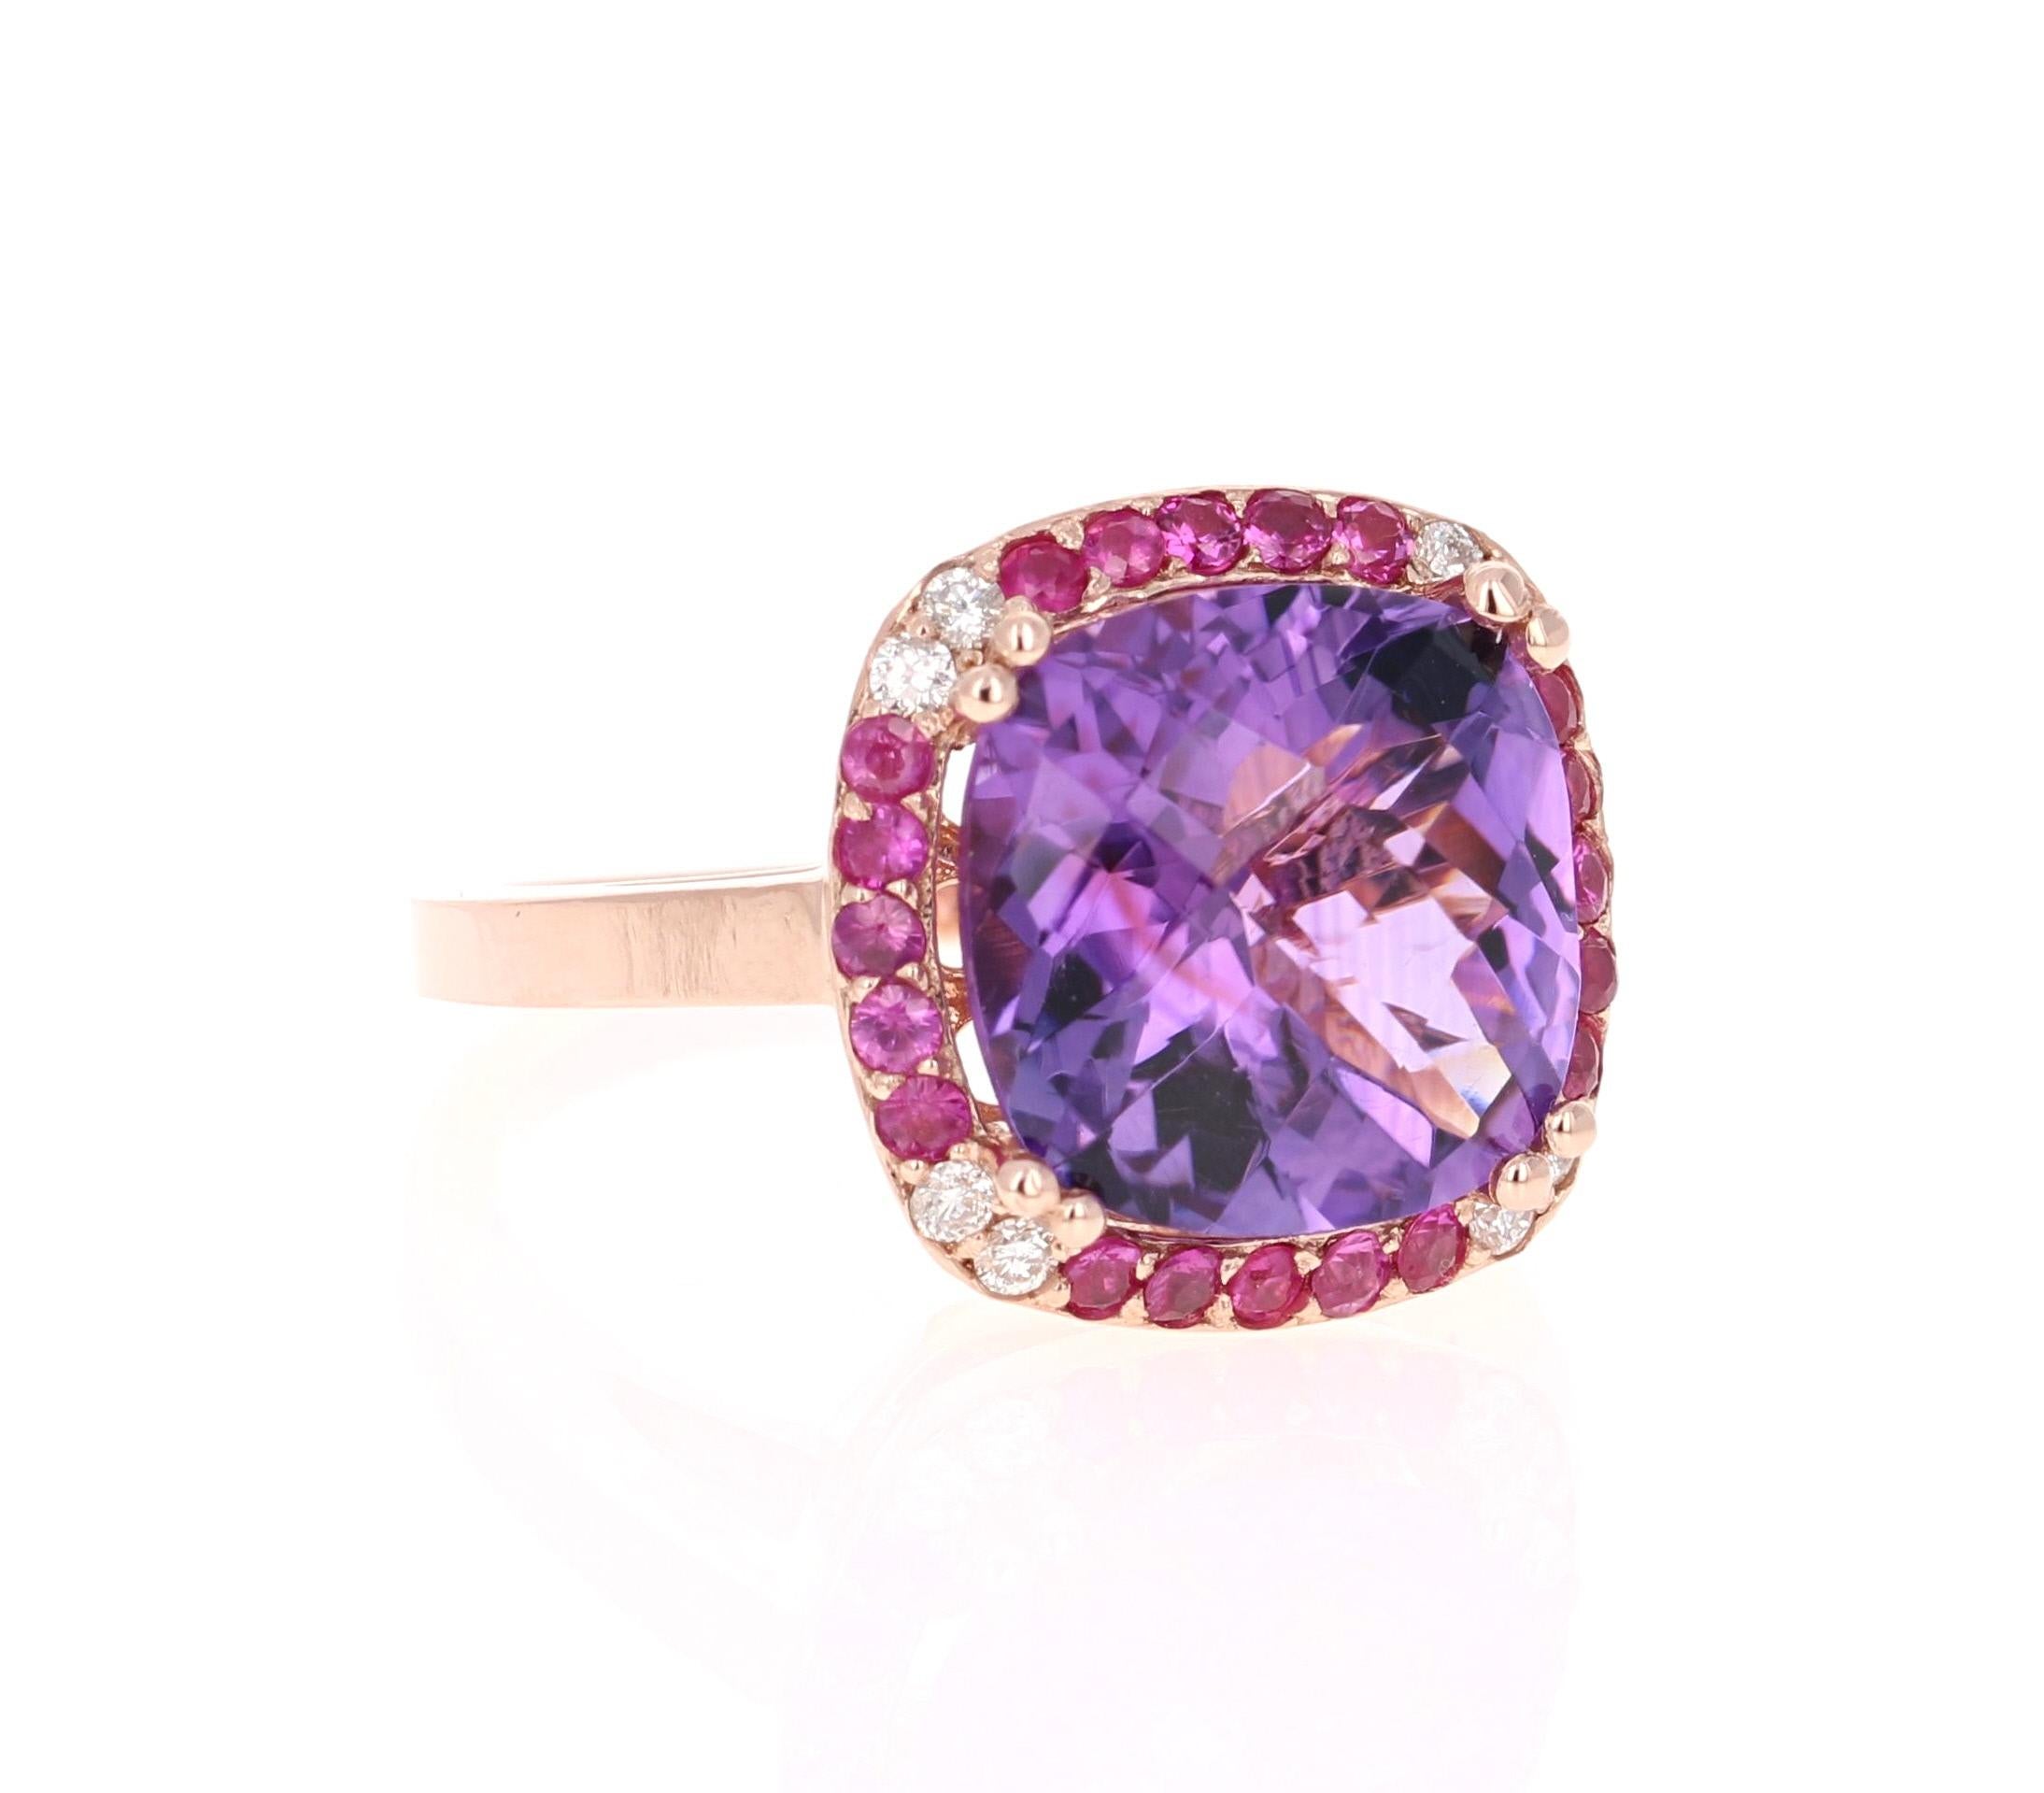 Amethyst, Pink Sapphire, and Diamond Cocktail Ring! 

Playful yet Powerful! Its like having a piece of glittery candy on your finger! This ring has a Checkers Cushion Cut Amethyst that weighs 5.94 Carats and is embellished with 20 Pink Sapphires